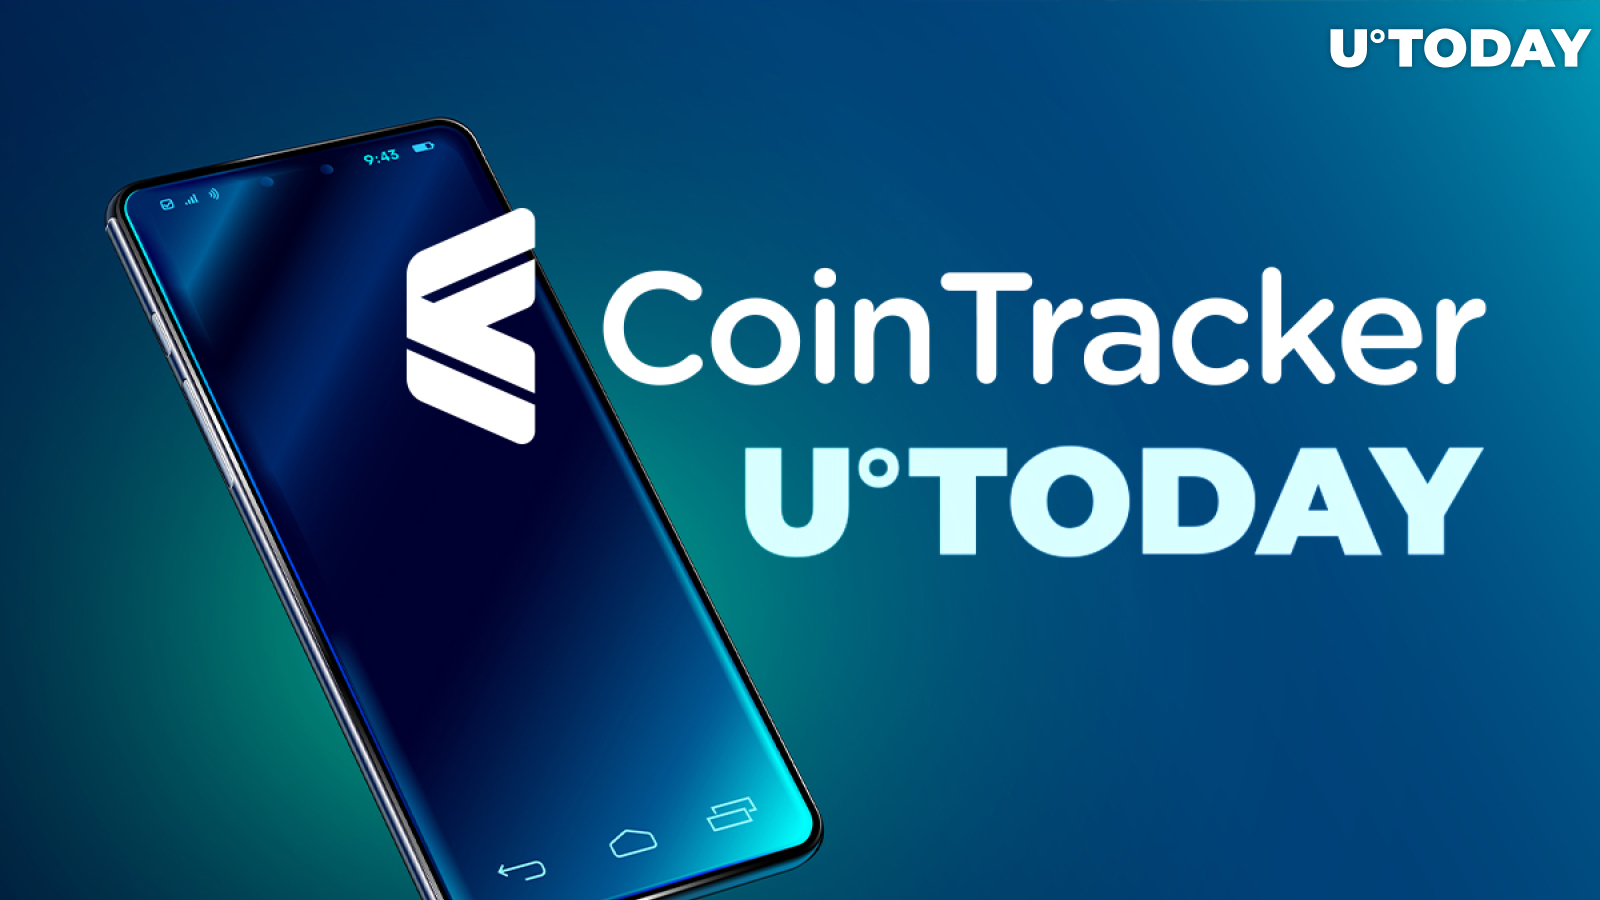 U.Today News and Articles Are Now on CoinTracker